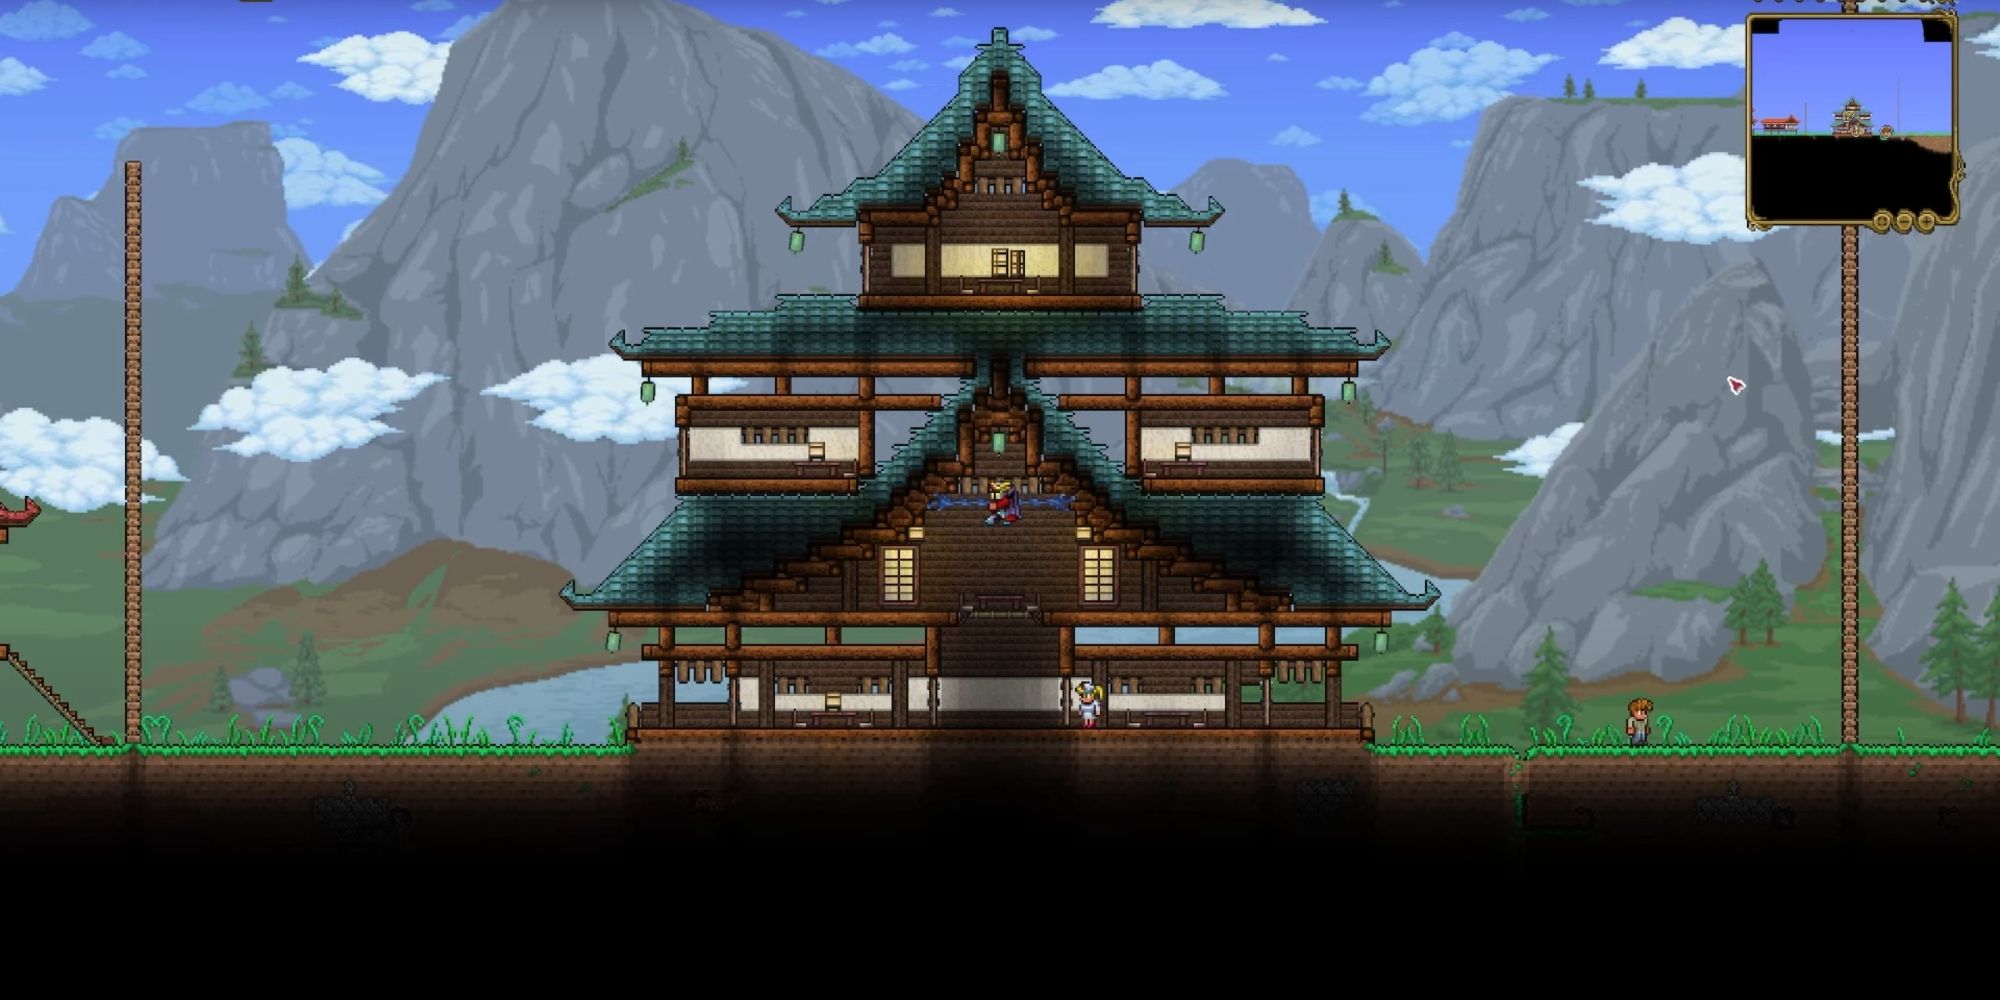 An image from Terraria of a Japanese Home, inspired by the designs found at traditional Japanese temples.